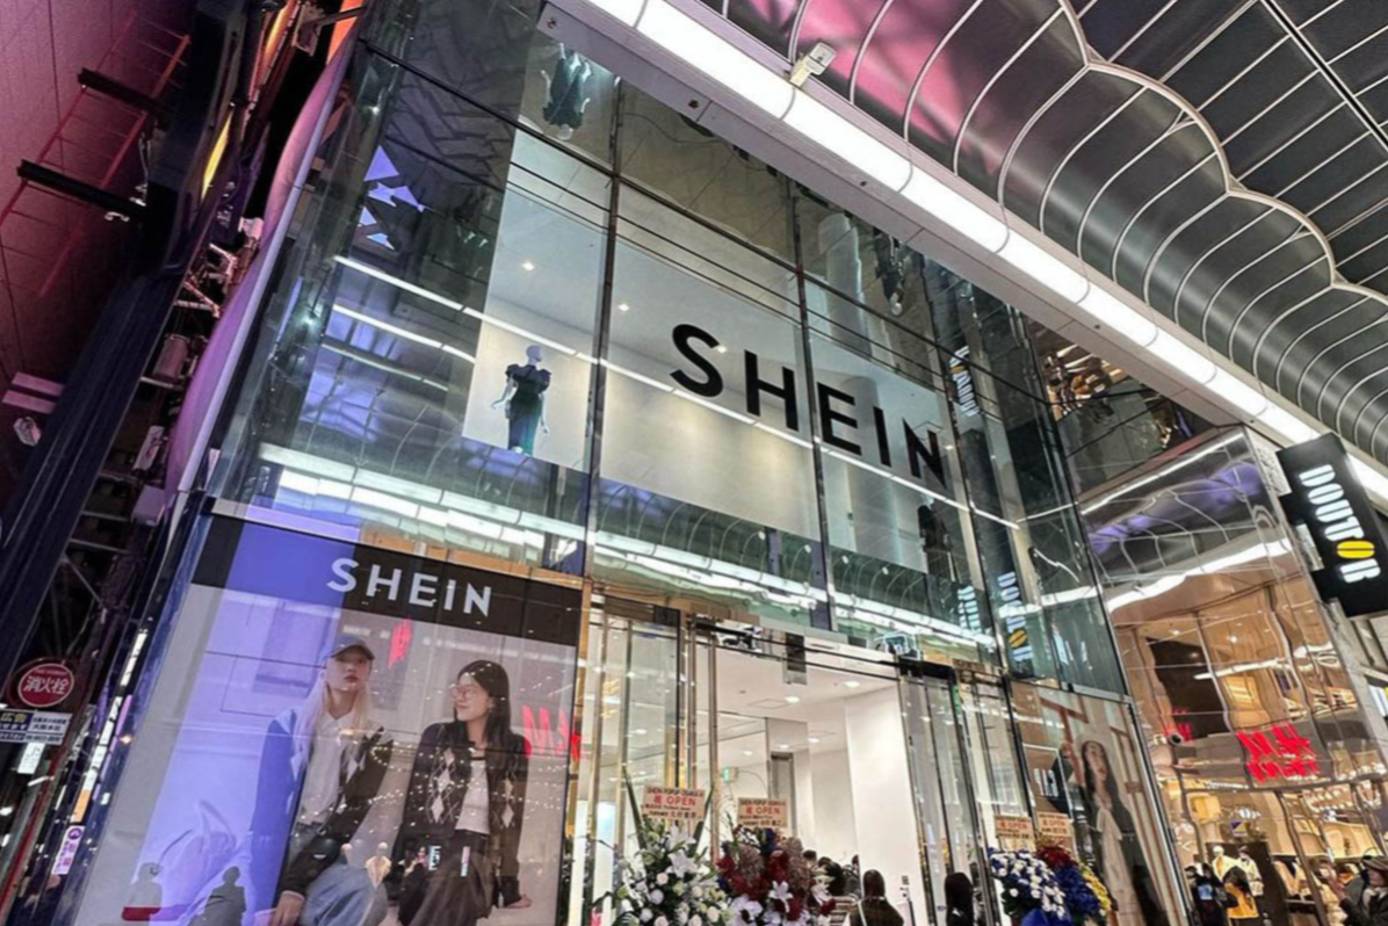 Shein's UK sales hit £1bn but Chinese retailer pays just £2m tax